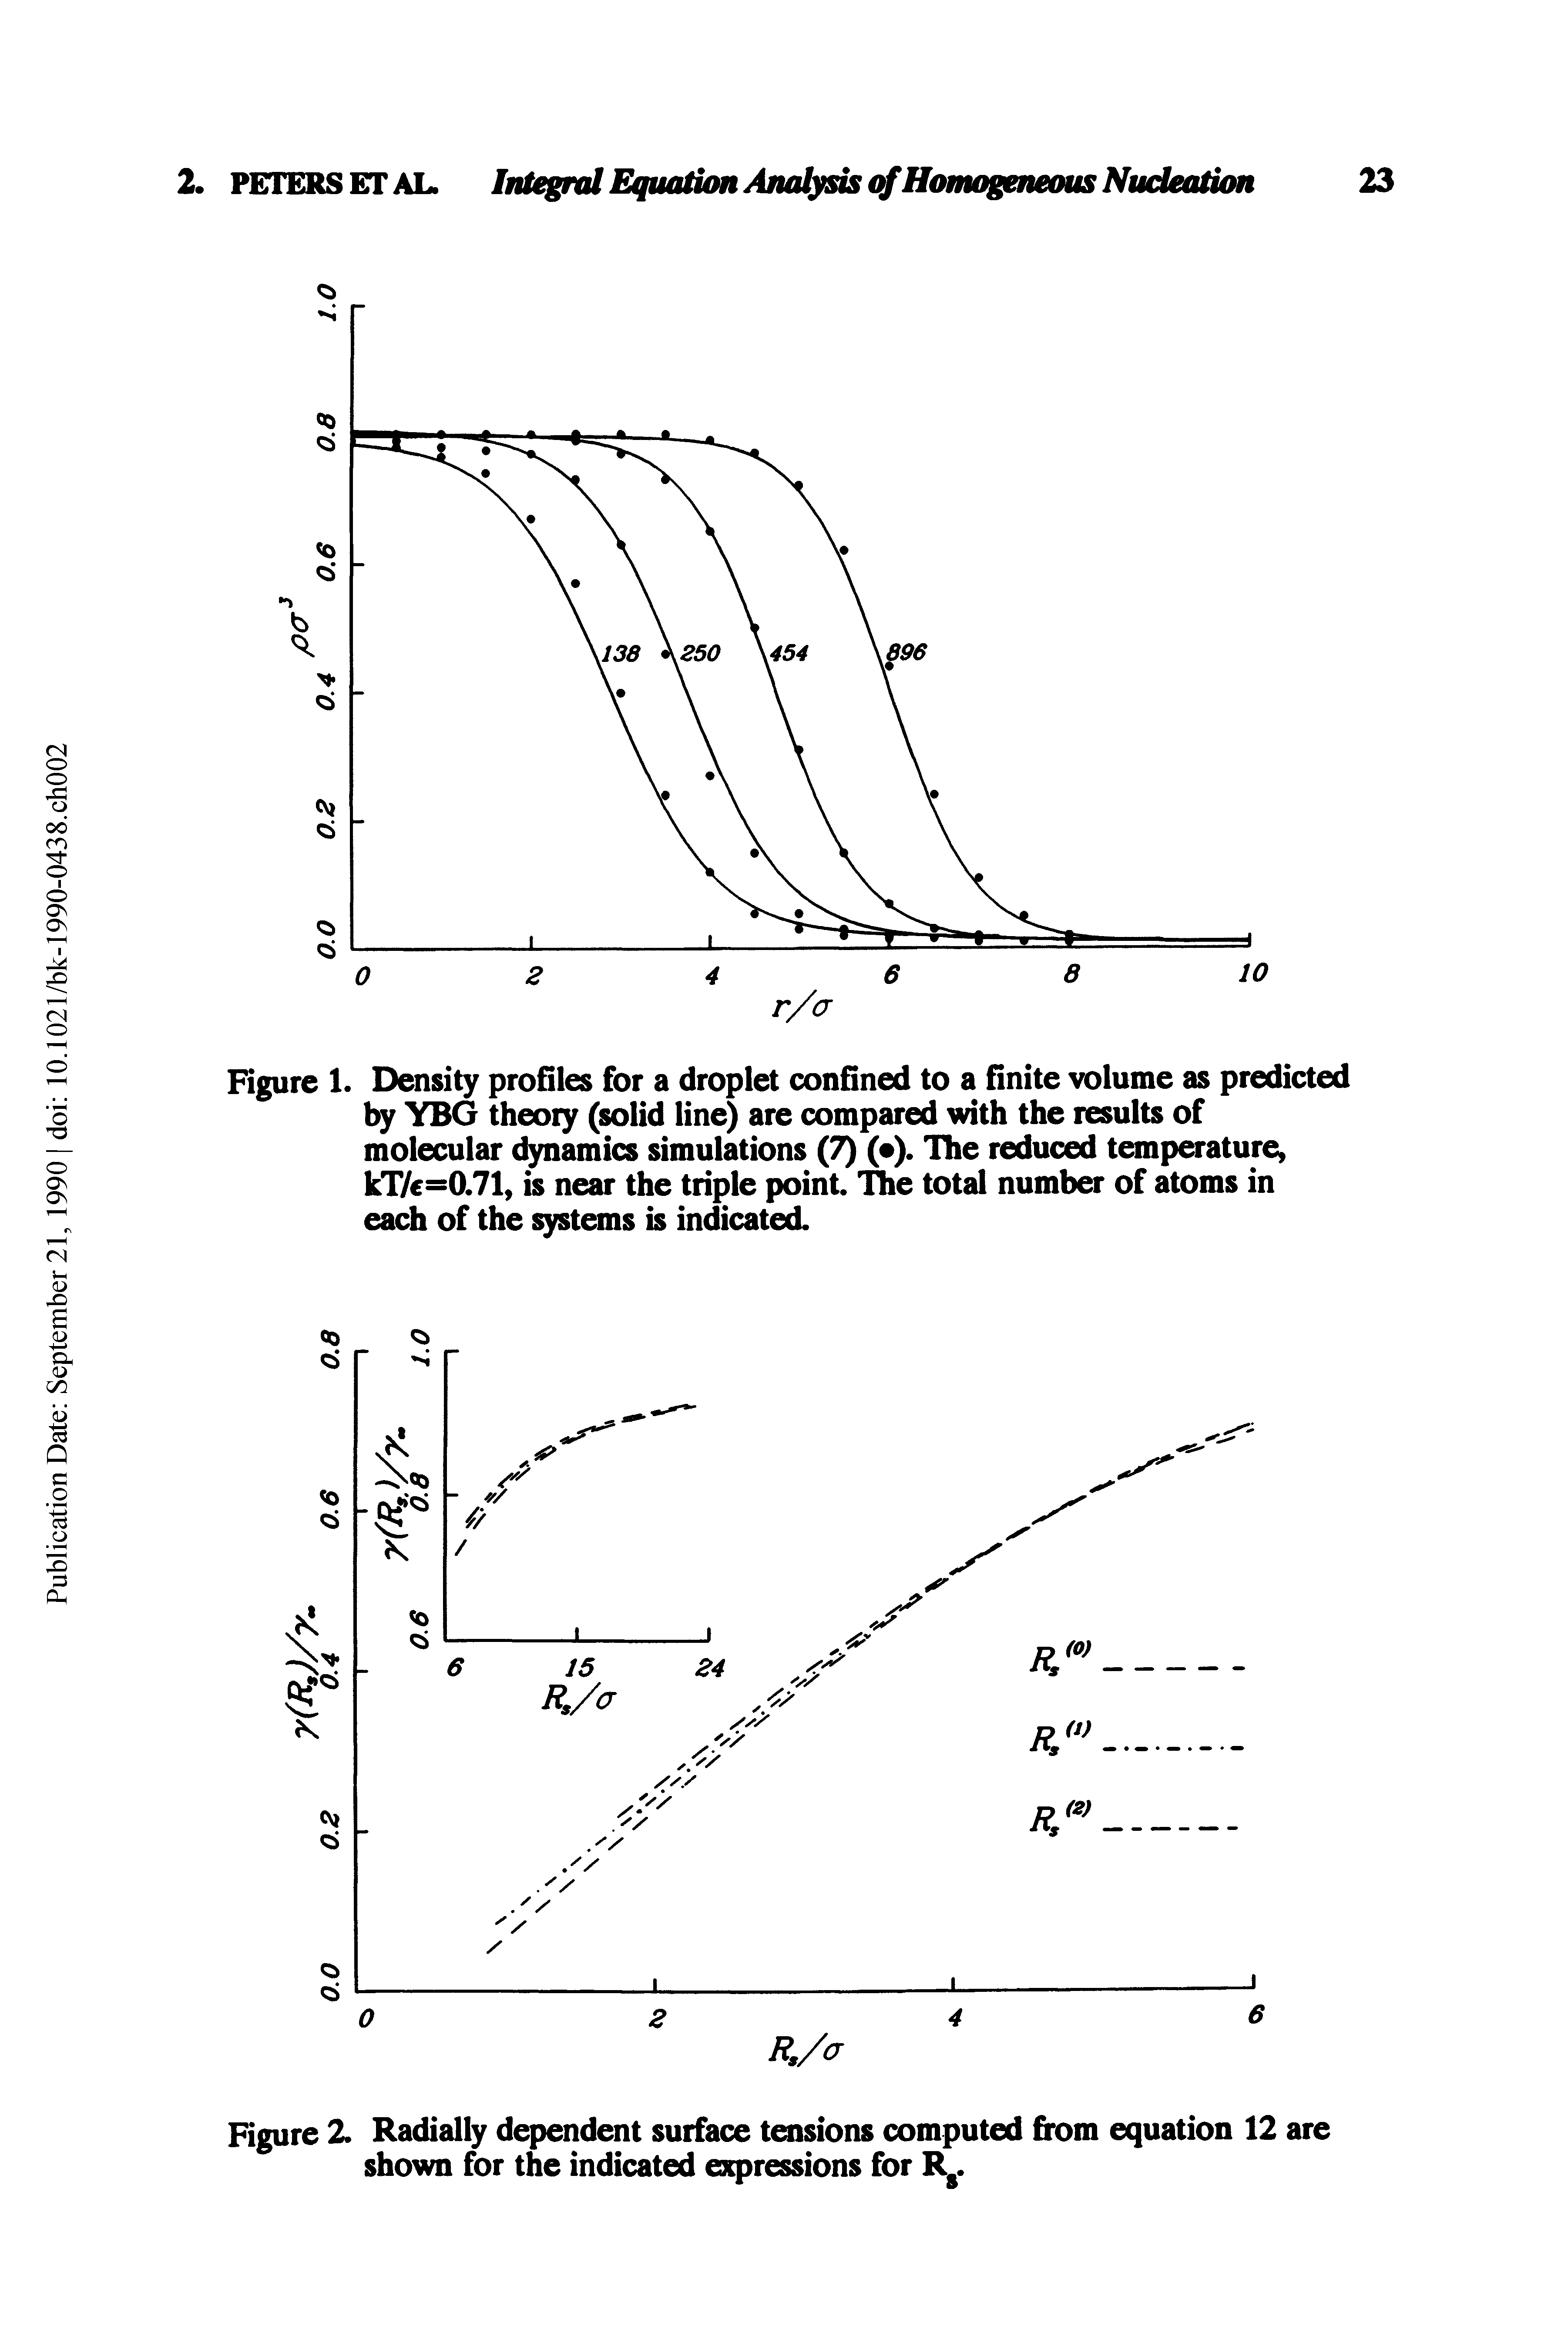 Figure 1. Density profiles for a droplet confined to a finite volume as predicted by YBG theoiy (solid line) are compared with the results of molecular dynamics simulations (7) ( ). The reduced temperature, kT/e=0.71, is near the triple point. The total number of atoms in each of the tems is indicated.